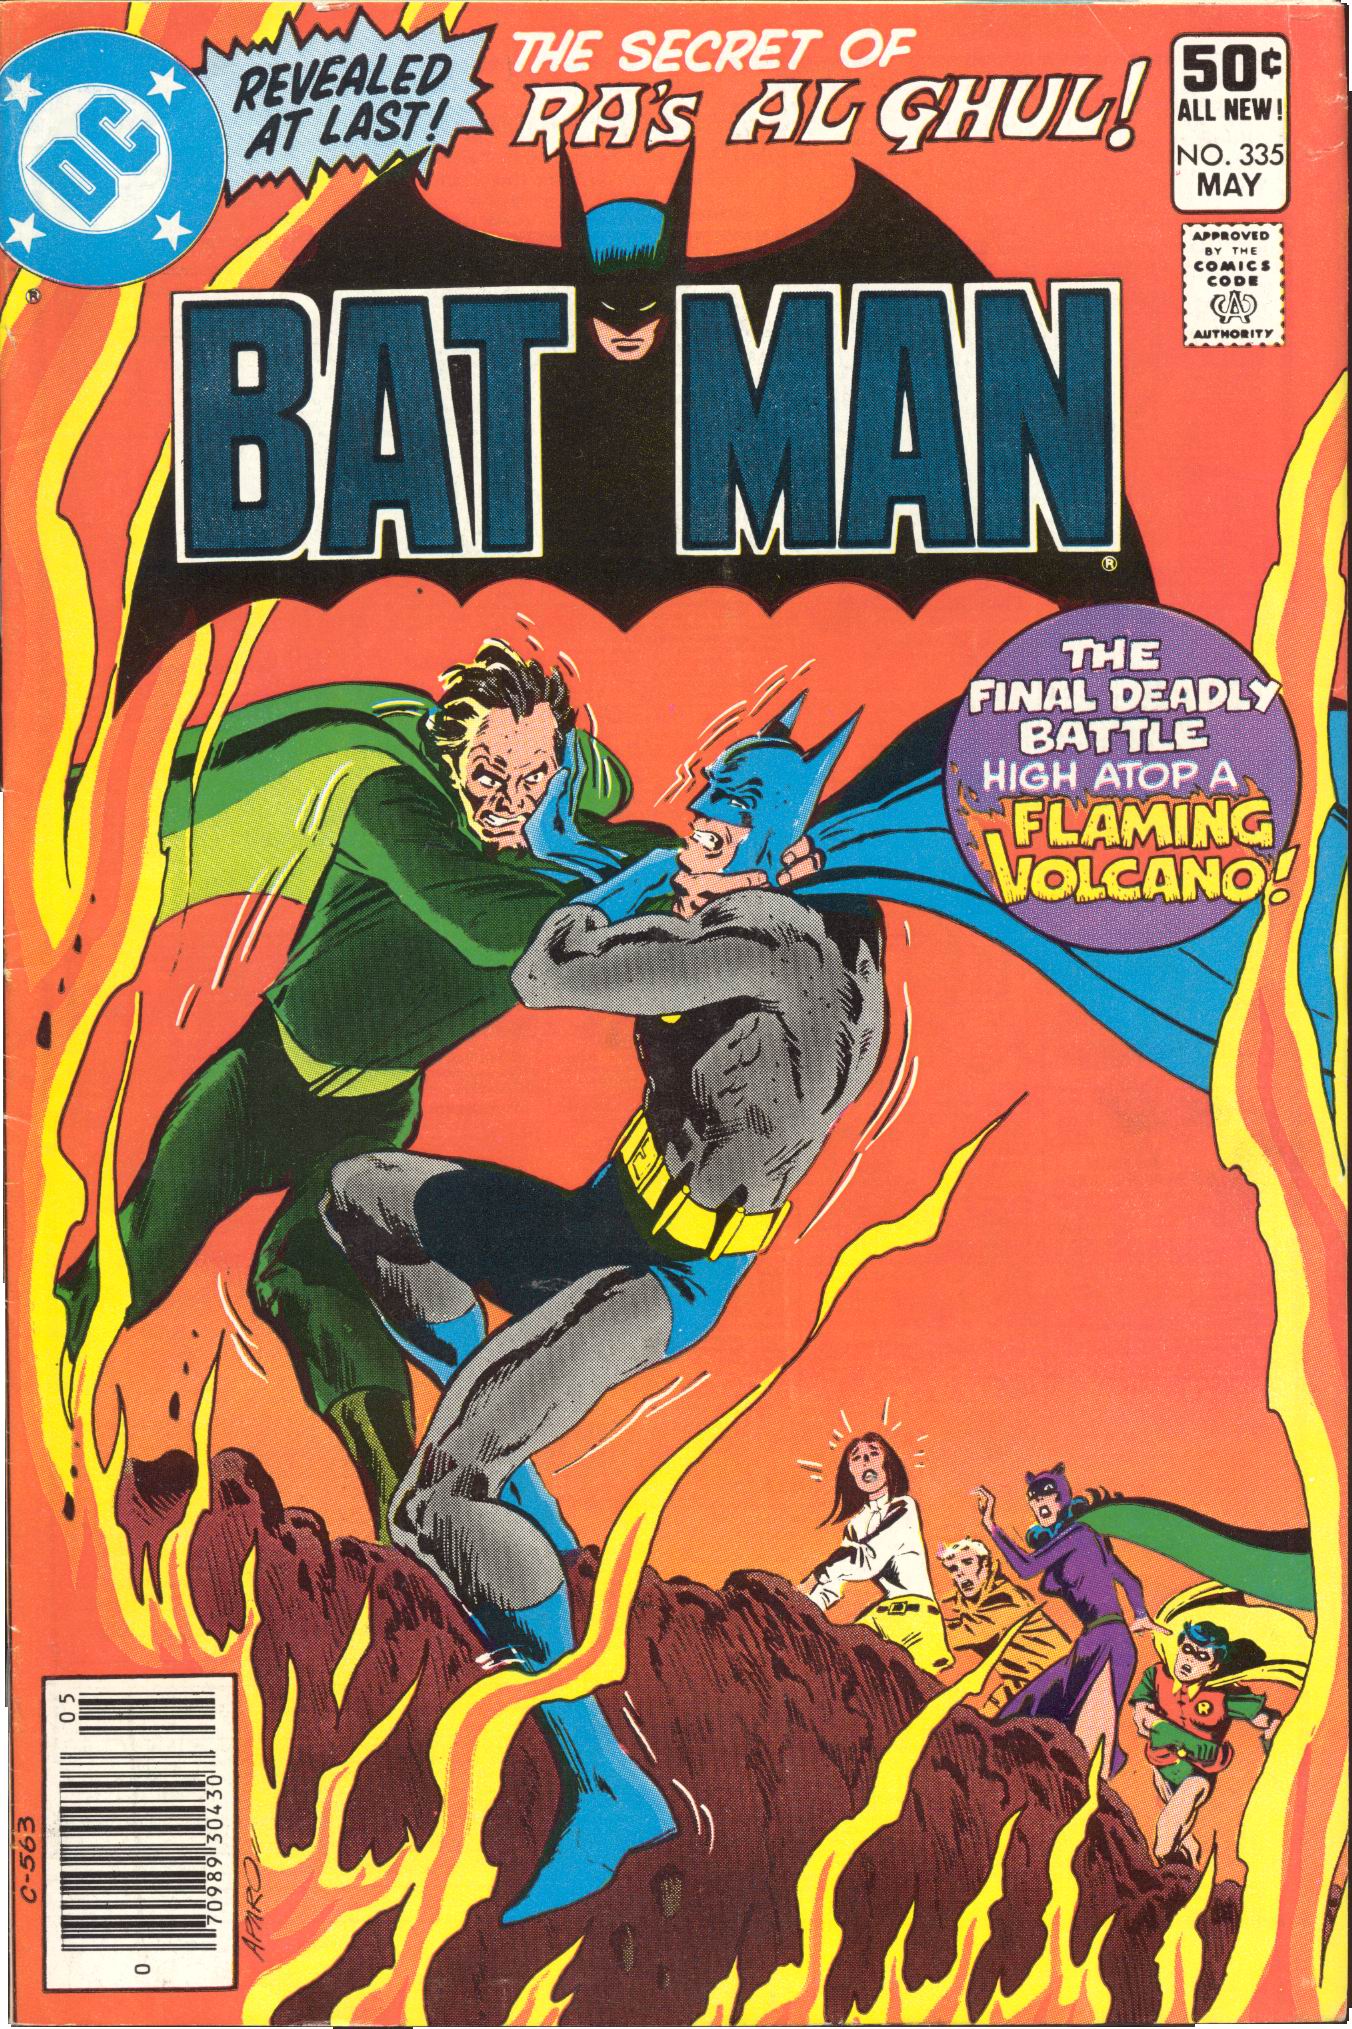 Batman 1940 Issue 335 | Read Batman 1940 Issue 335 comic online in high  quality. Read Full Comic online for free - Read comics online in high  quality .| READ COMIC ONLINE